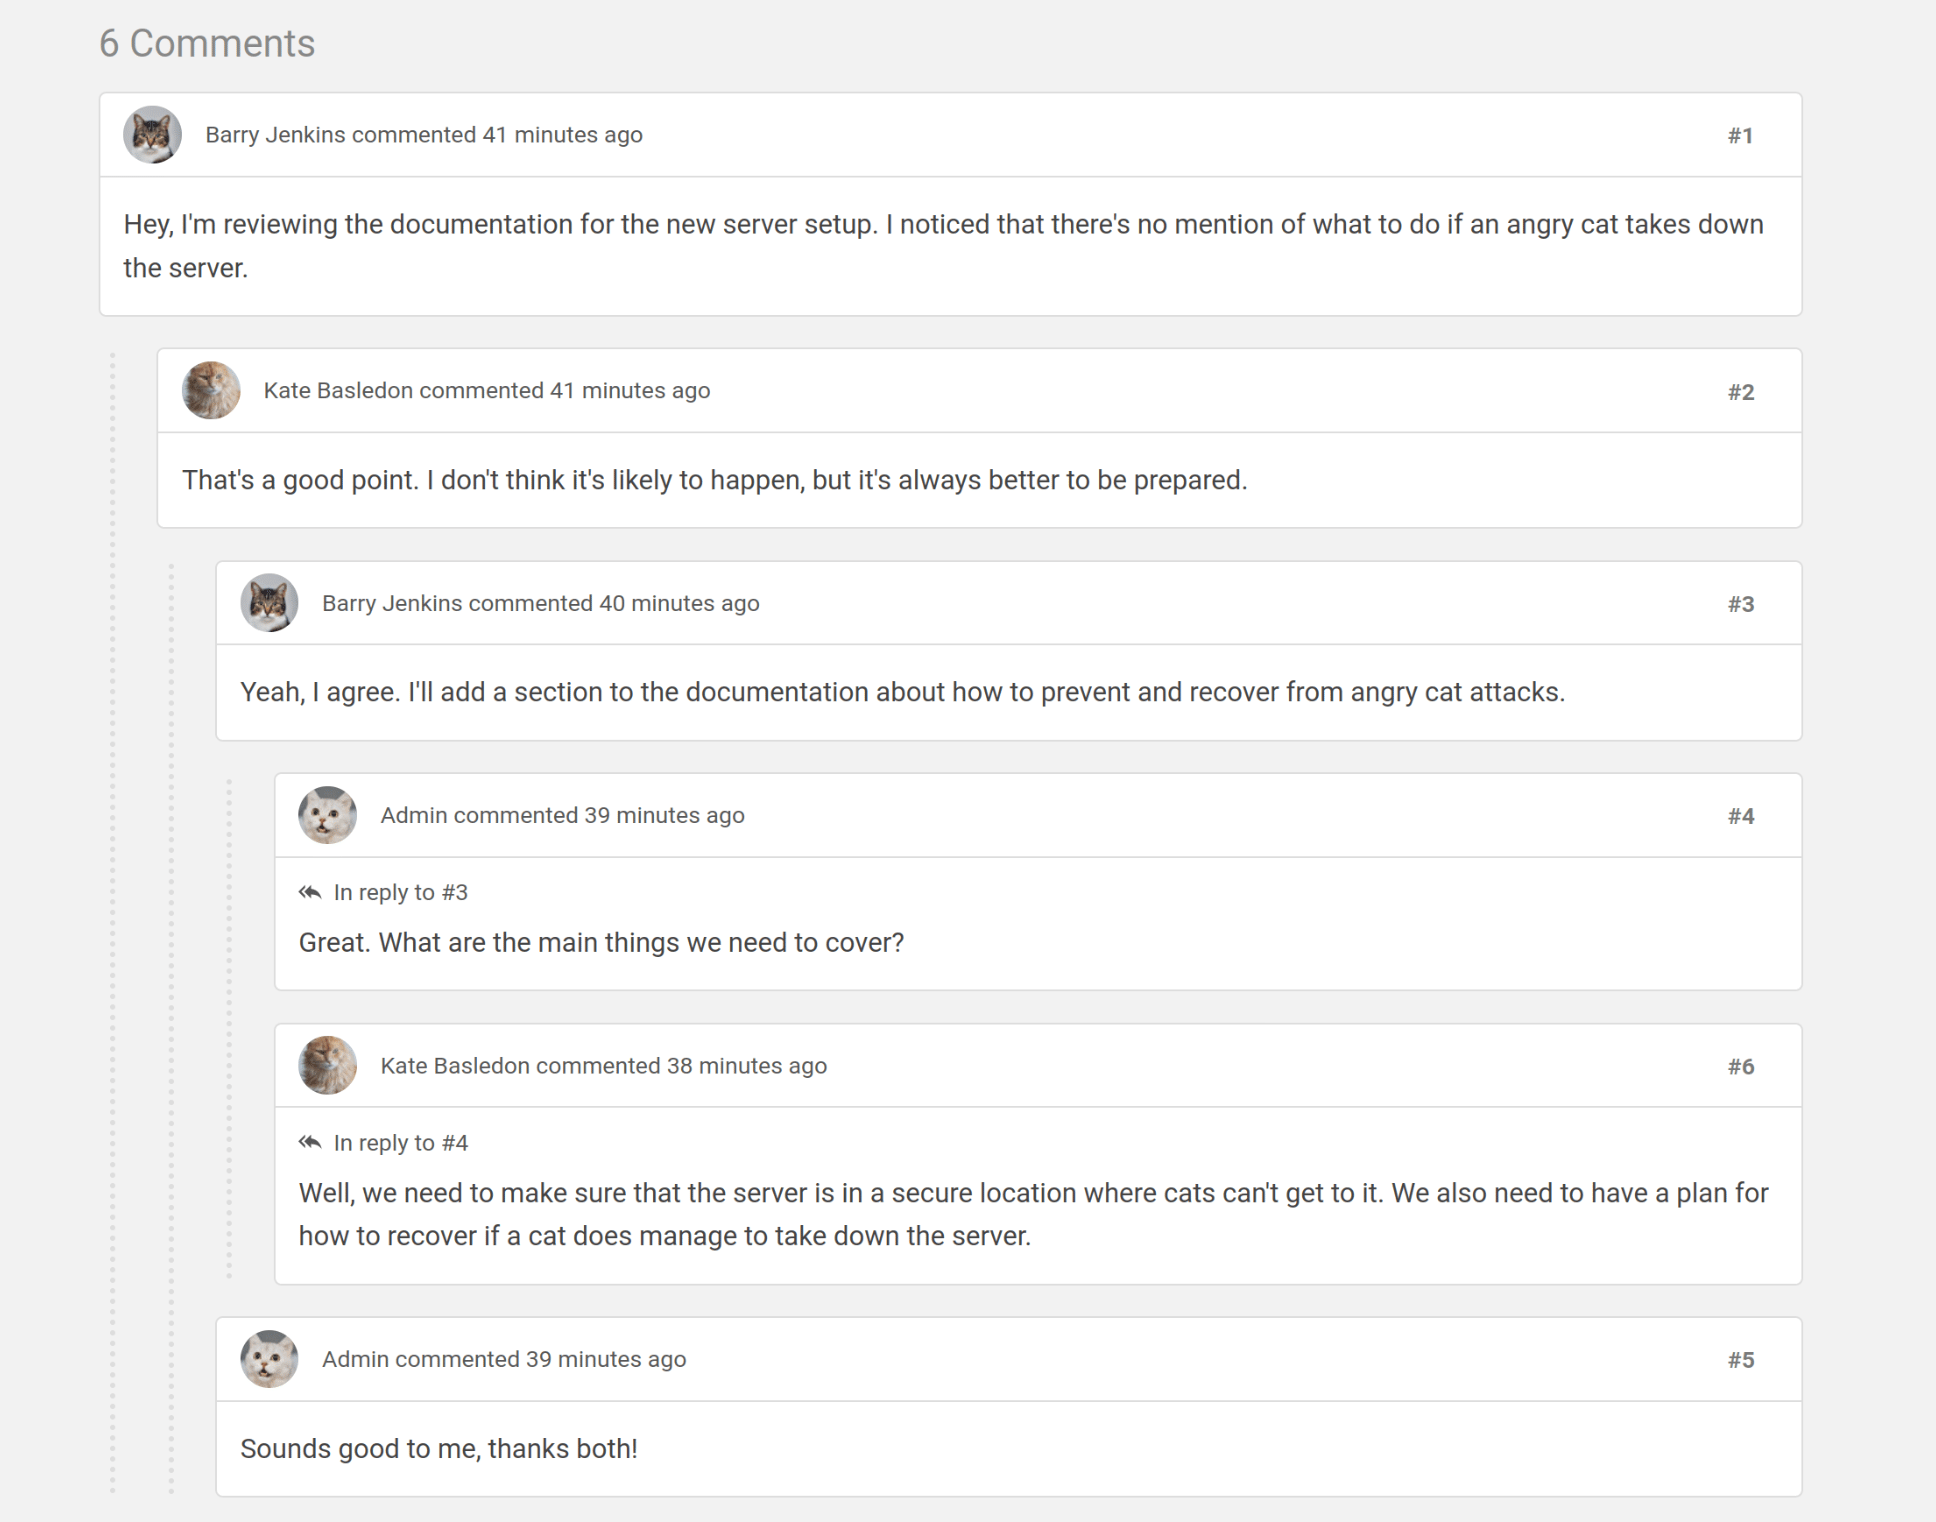 A view of 6 comments between 3 users, nested at different depths, at 4 visual levels